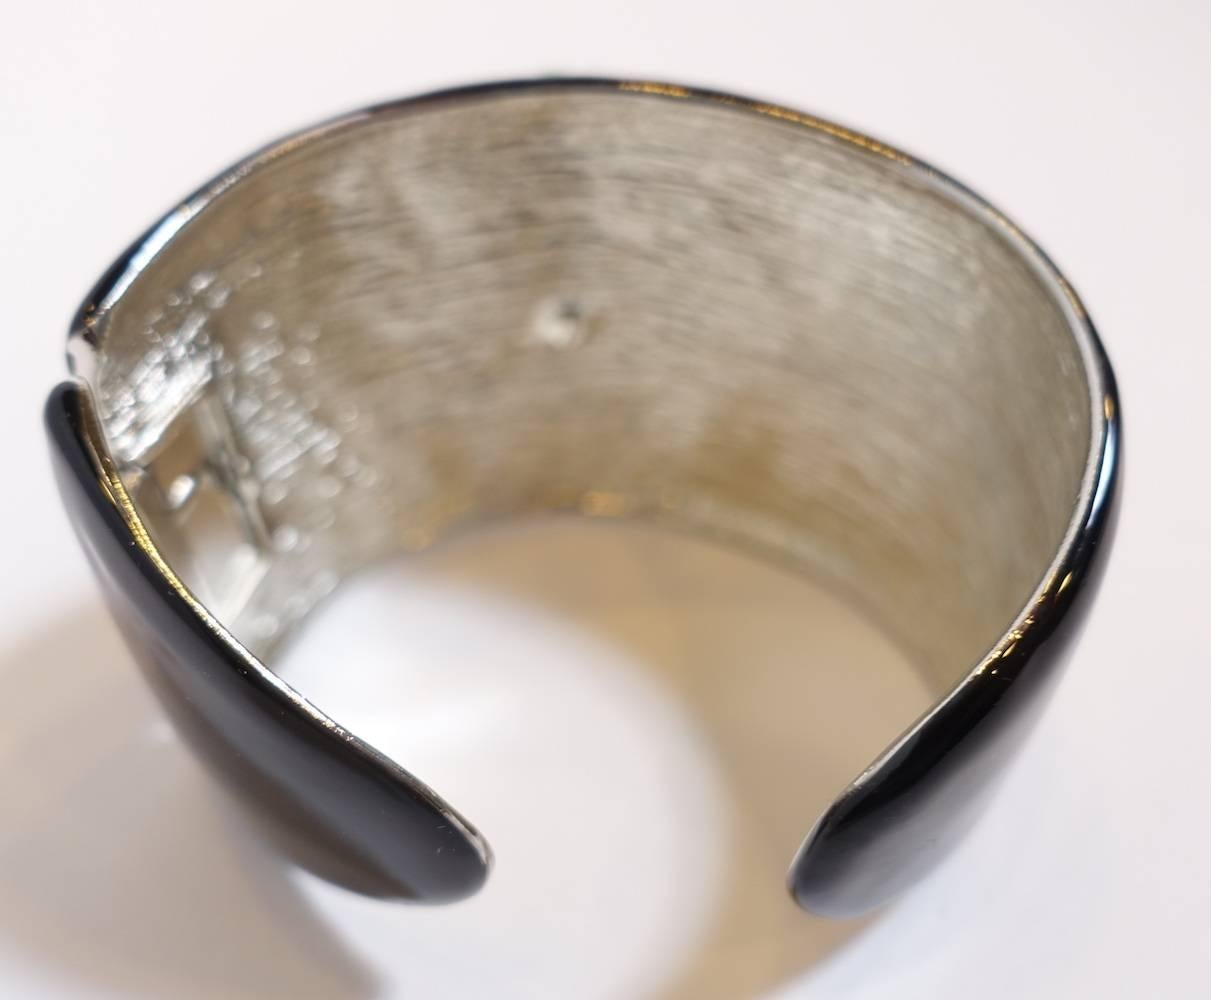 This signed Kenneth Jay Lane deco style cuff features a heavily carved faux jade center with crystal accents on each side on black enamel.  It is in a nickel-free silver-plated base metal setting.  This cuff measures 7” x 1-7/8” wide with a